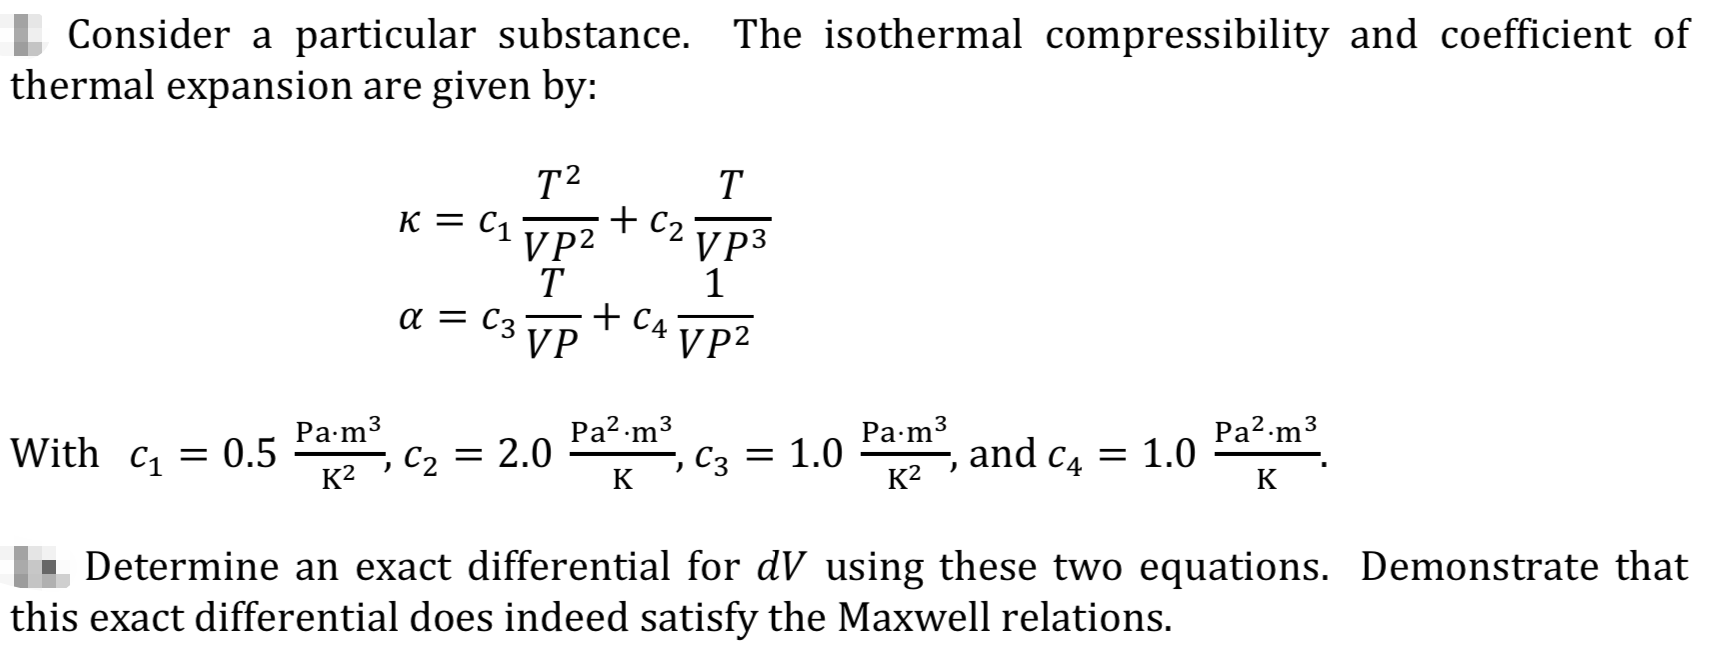 Consider a particular substance. The isothermal compressibility and coefficient of
thermal expansion are given by:
T2
K = C1
VP2
T
a = C3
VP
T
+ C2
V 3
1
+ C4
VP2
Pa2-m3
1.0
Pa2.m3
Рa-m3
, С2 — 2.0
Ра-m3
With C1
= 0.5
K2
= 1.0
and c4
K²
K
K
- Determine an exact differential for dV using these two equations. Demonstrate that
this exact differential does indeed satisfy the Maxwell relations.
